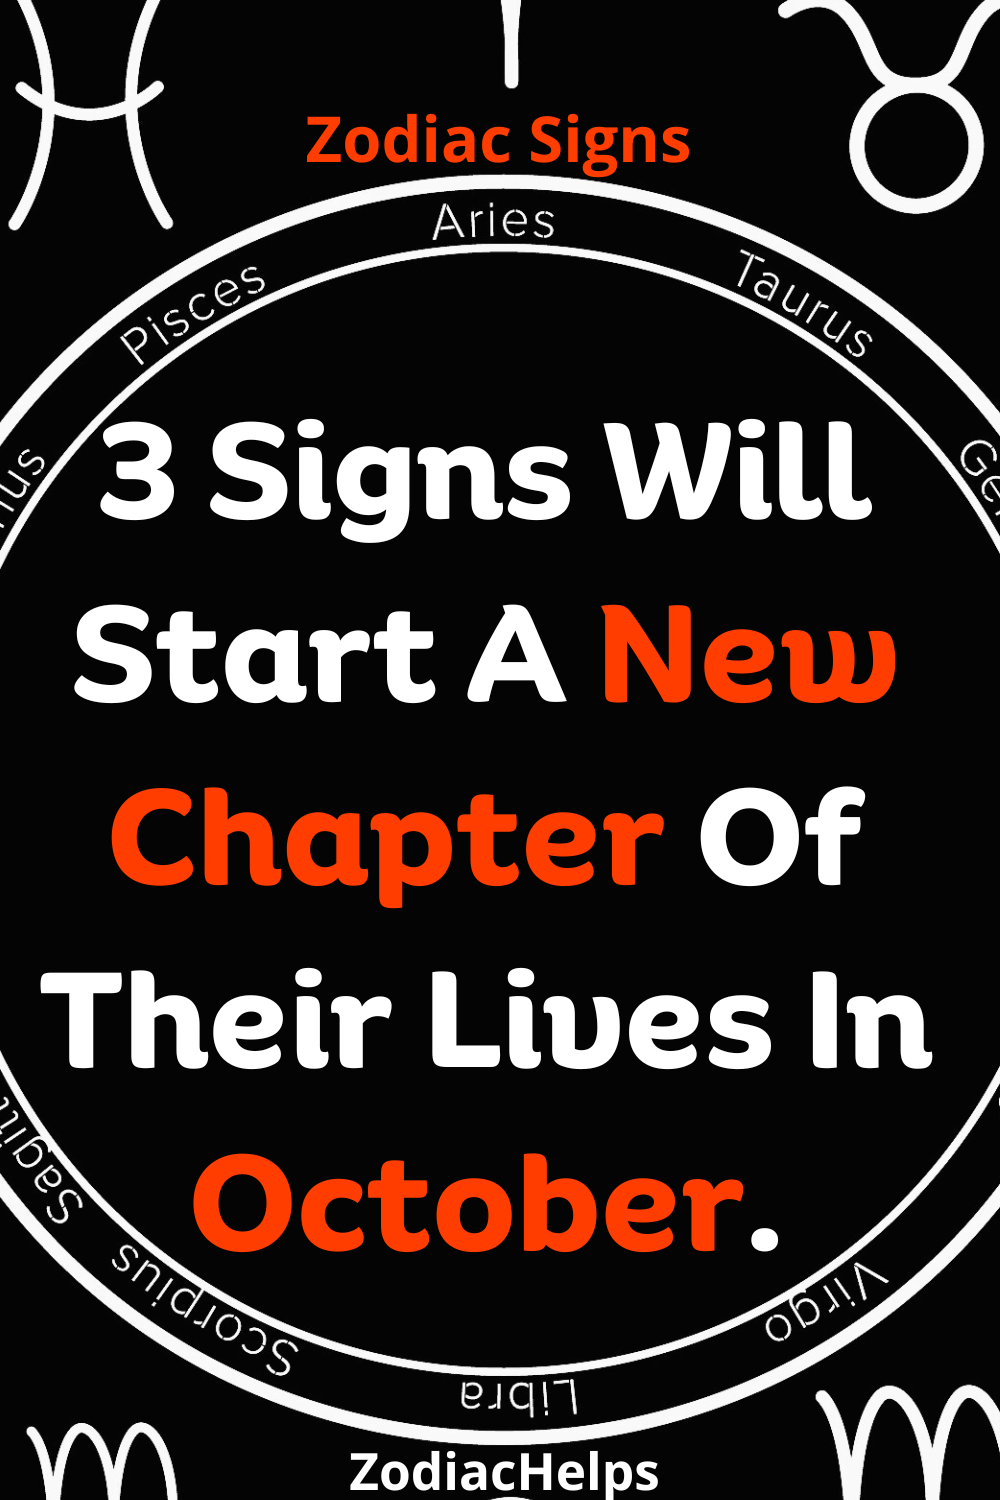 3 Signs Will Start A New Chapter Of Their Lives In October.